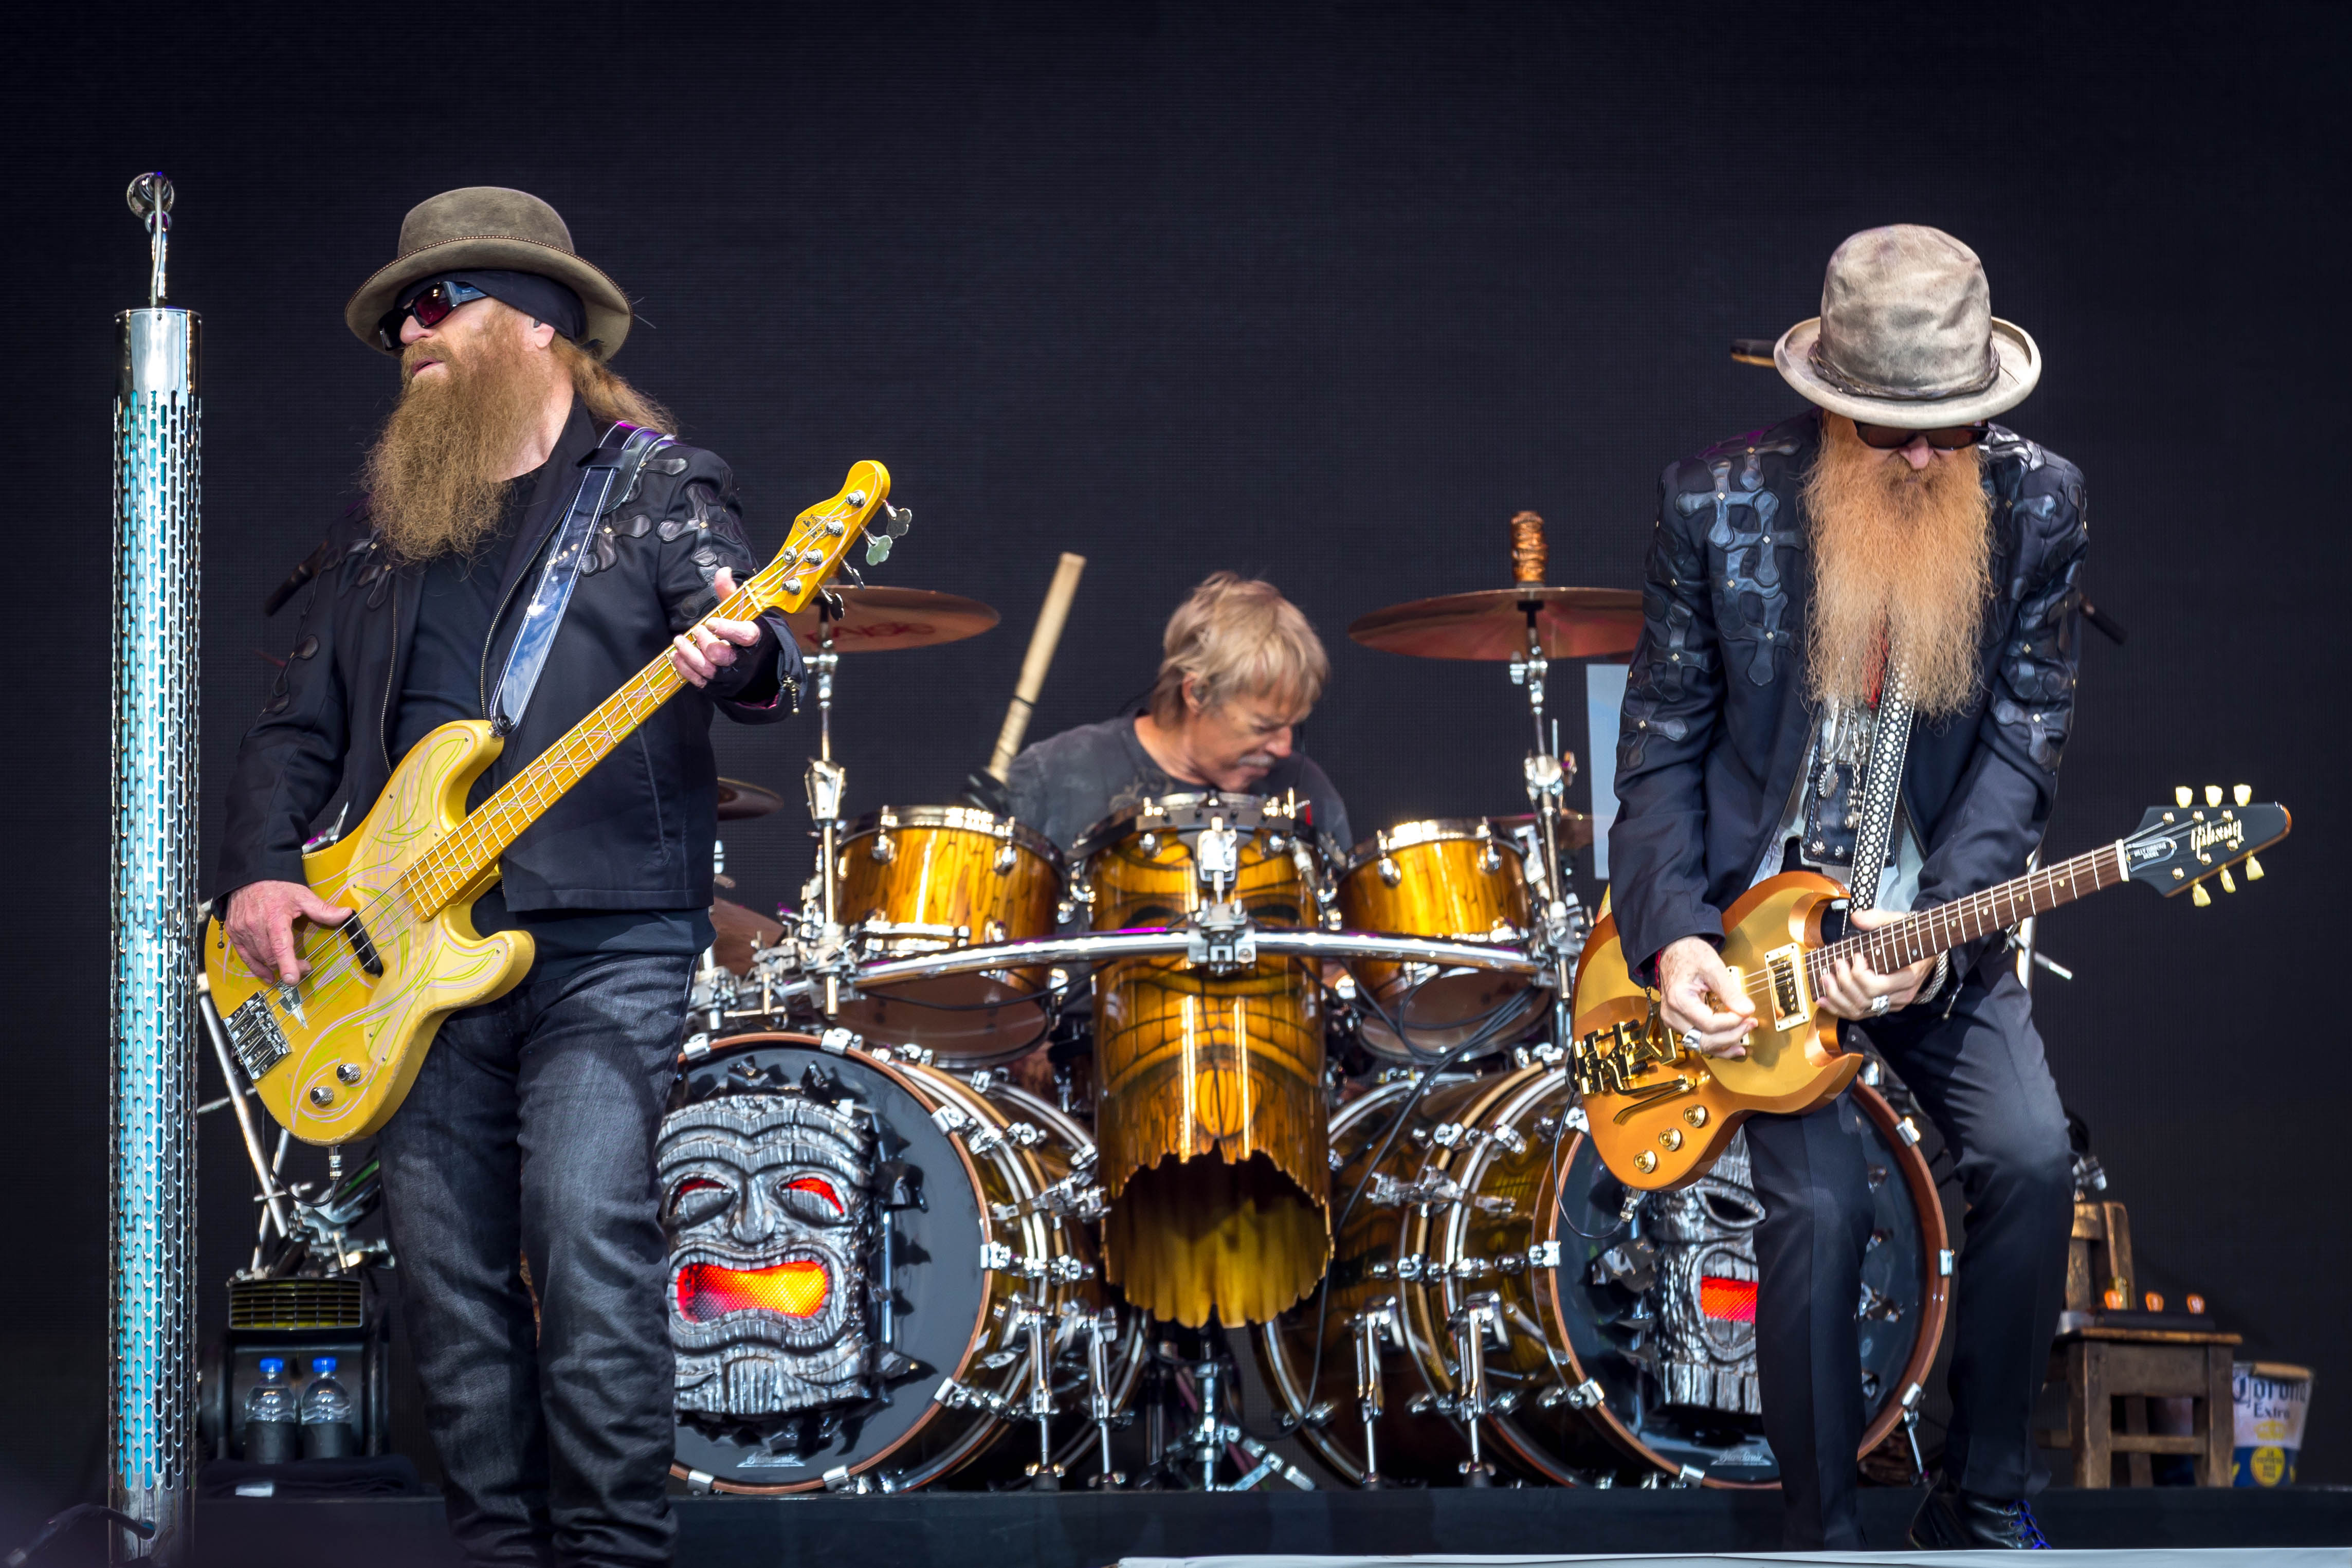 ZZ Top performing during a concert